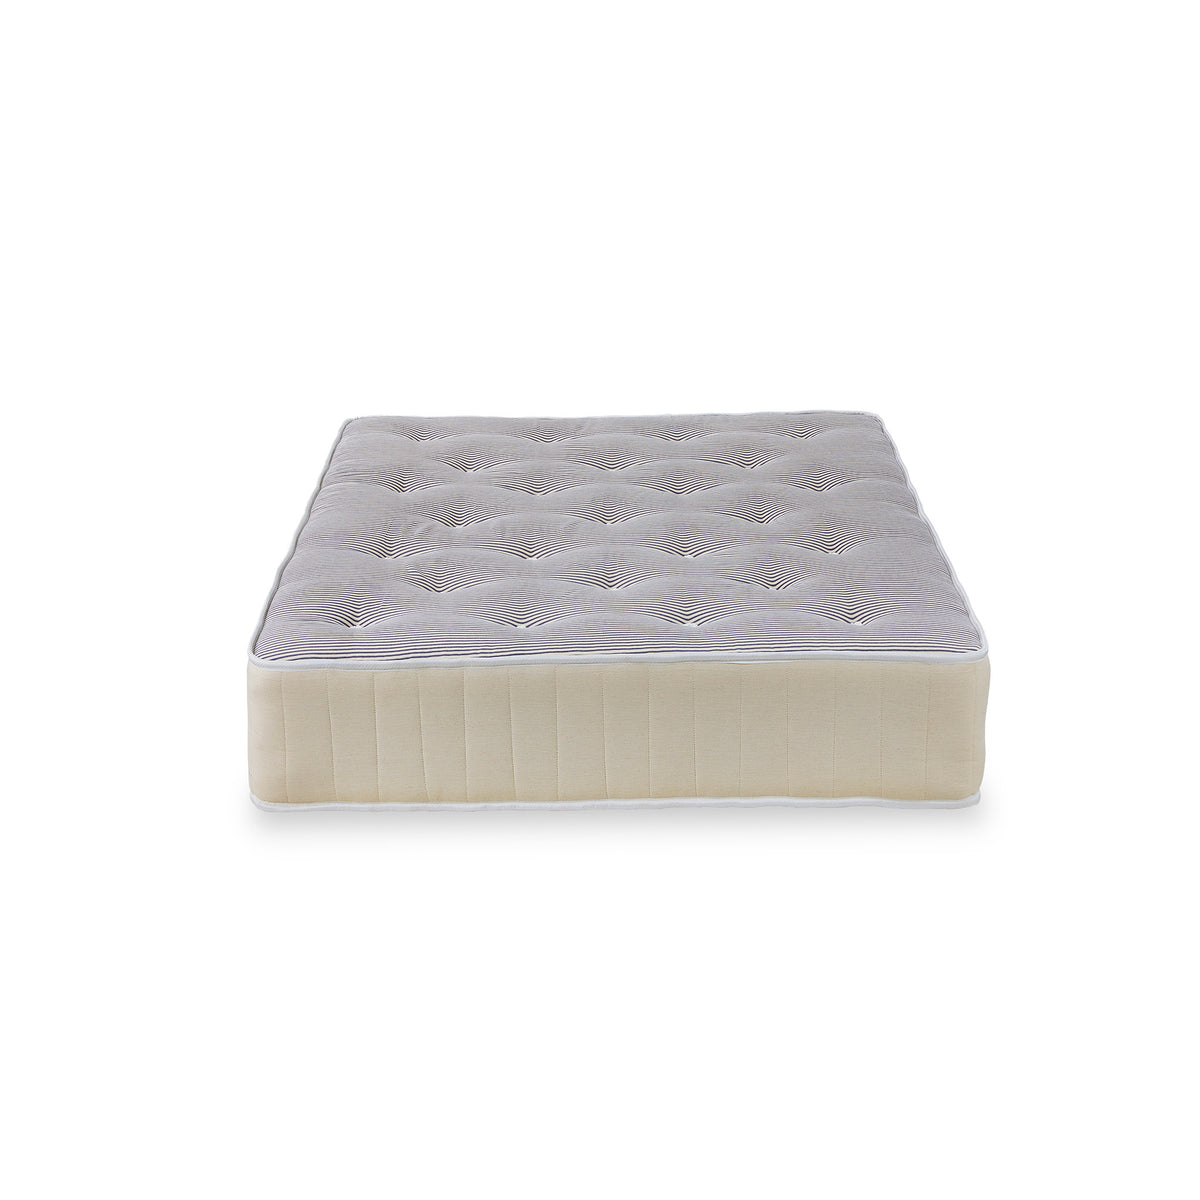 Roseland Sleep Orthopaedic Support Mattress 4ft small double